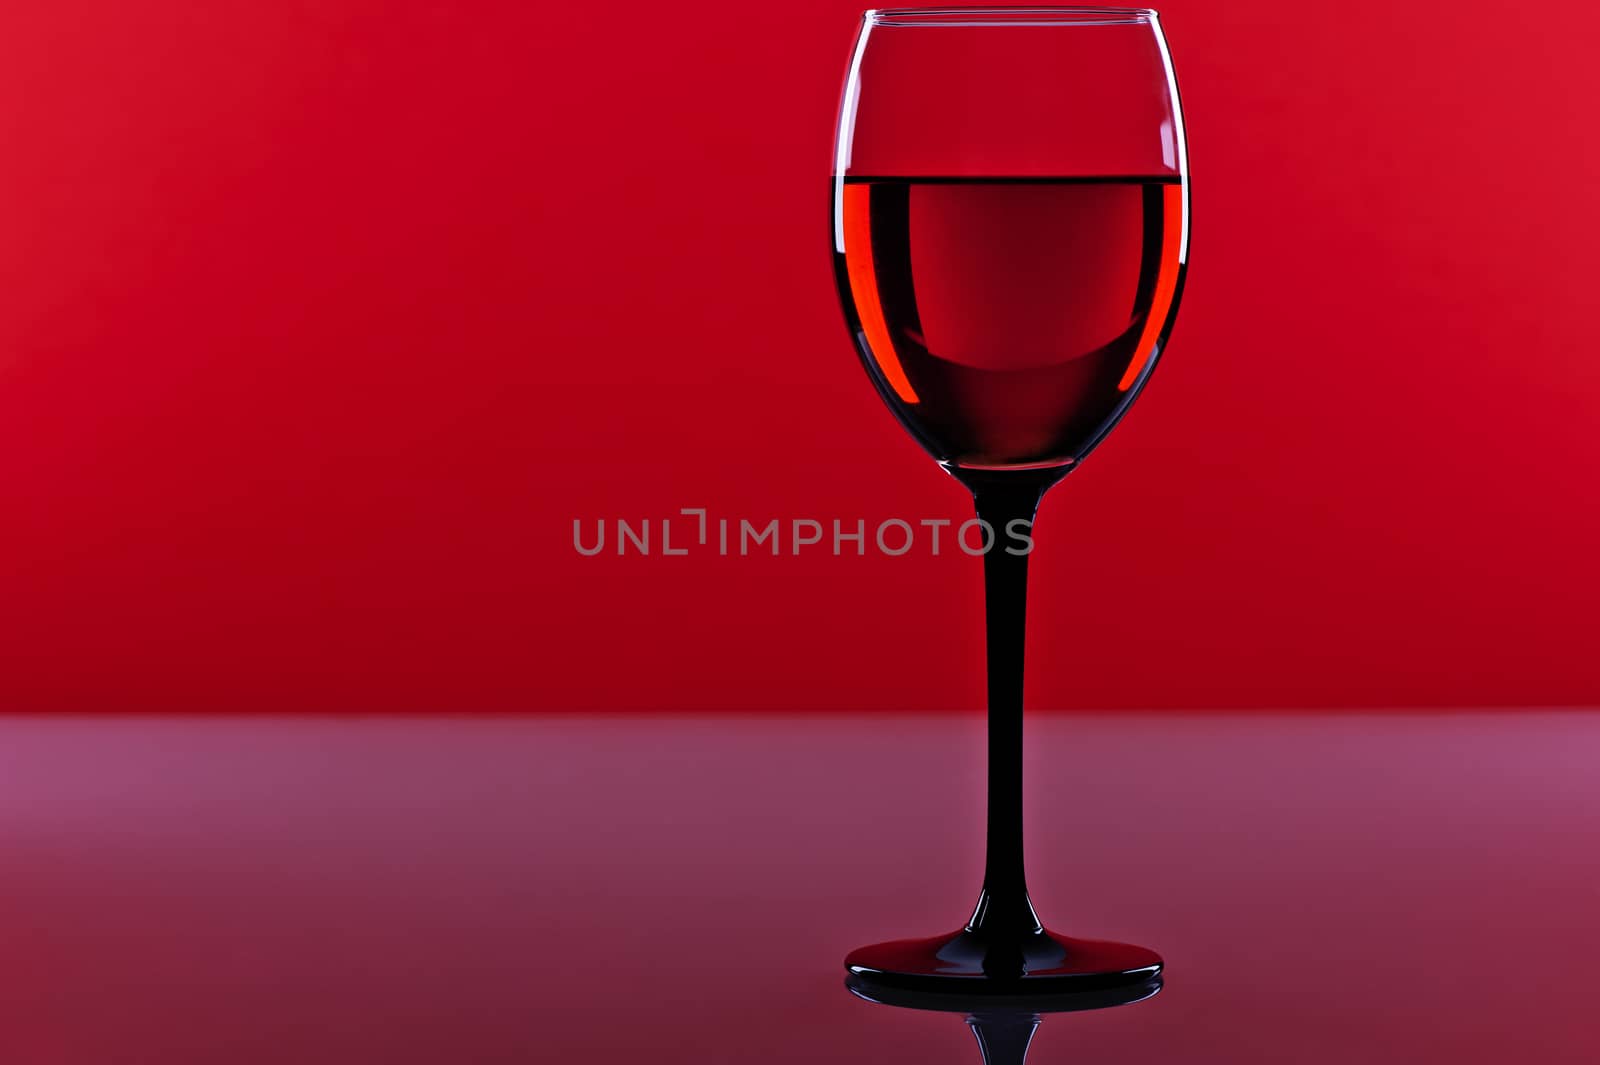 Glass of red french wine on a red background by Michalowski